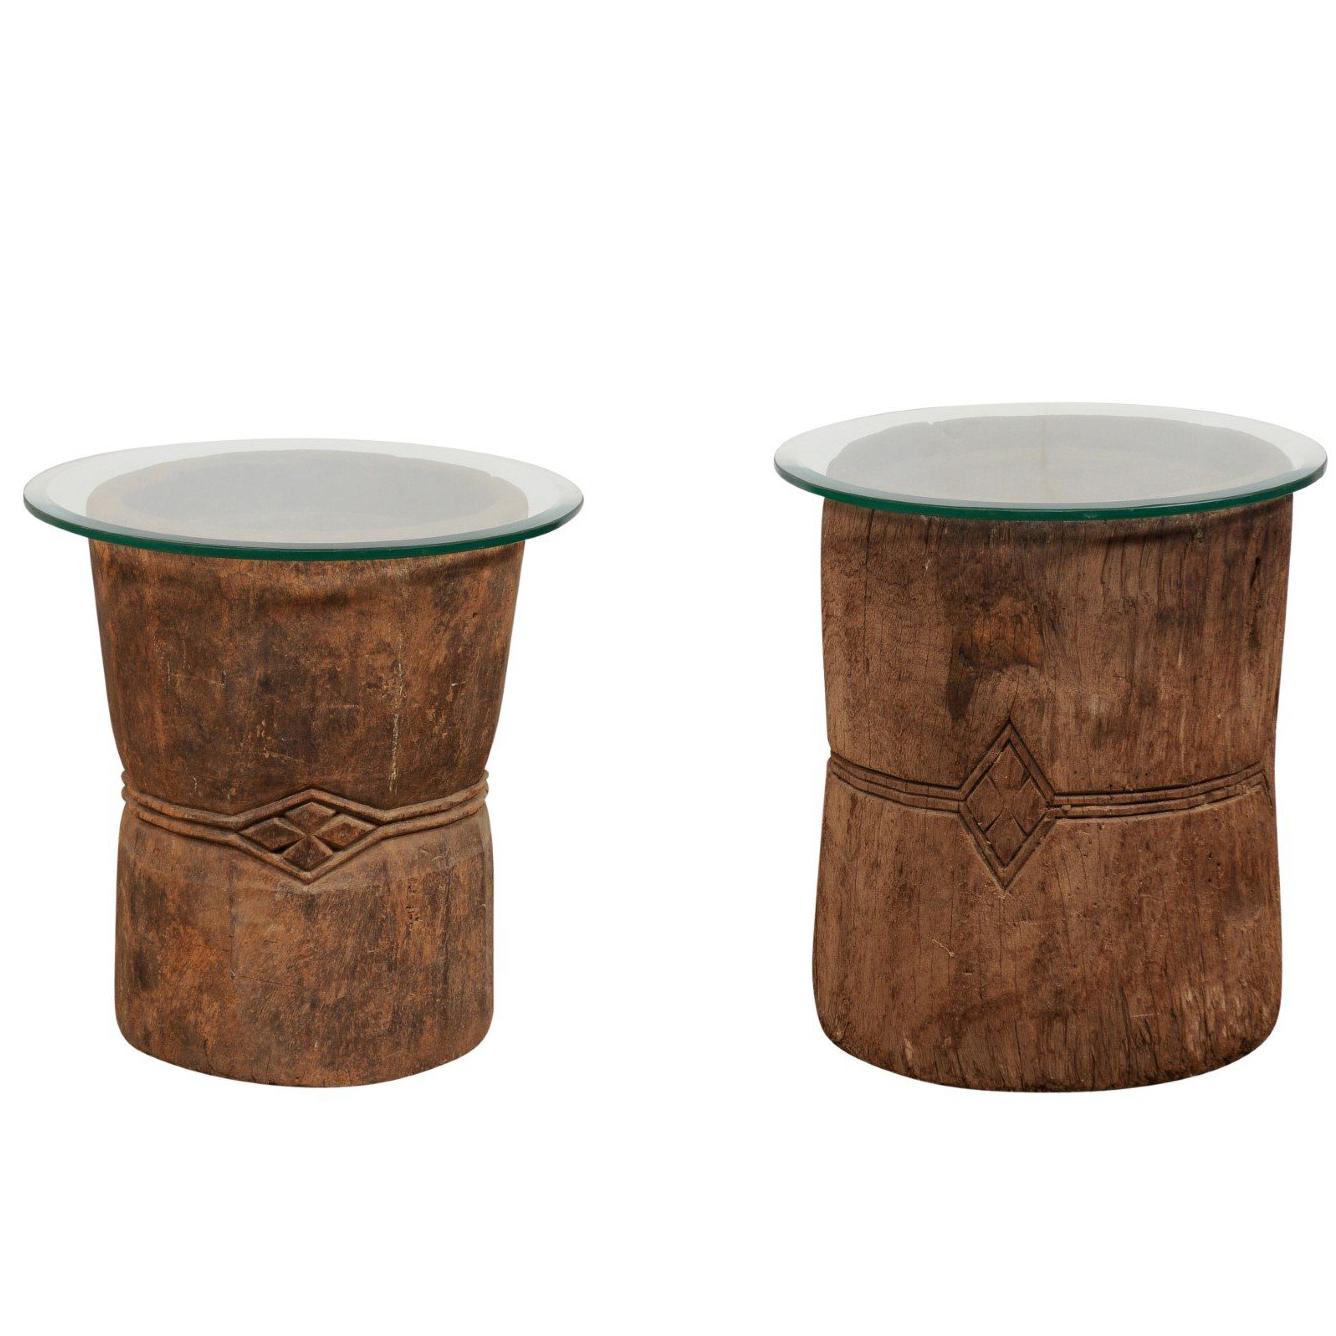 Pair of 19th Century Rustic Wood Mortar and Glass Top Side Tables For Sale